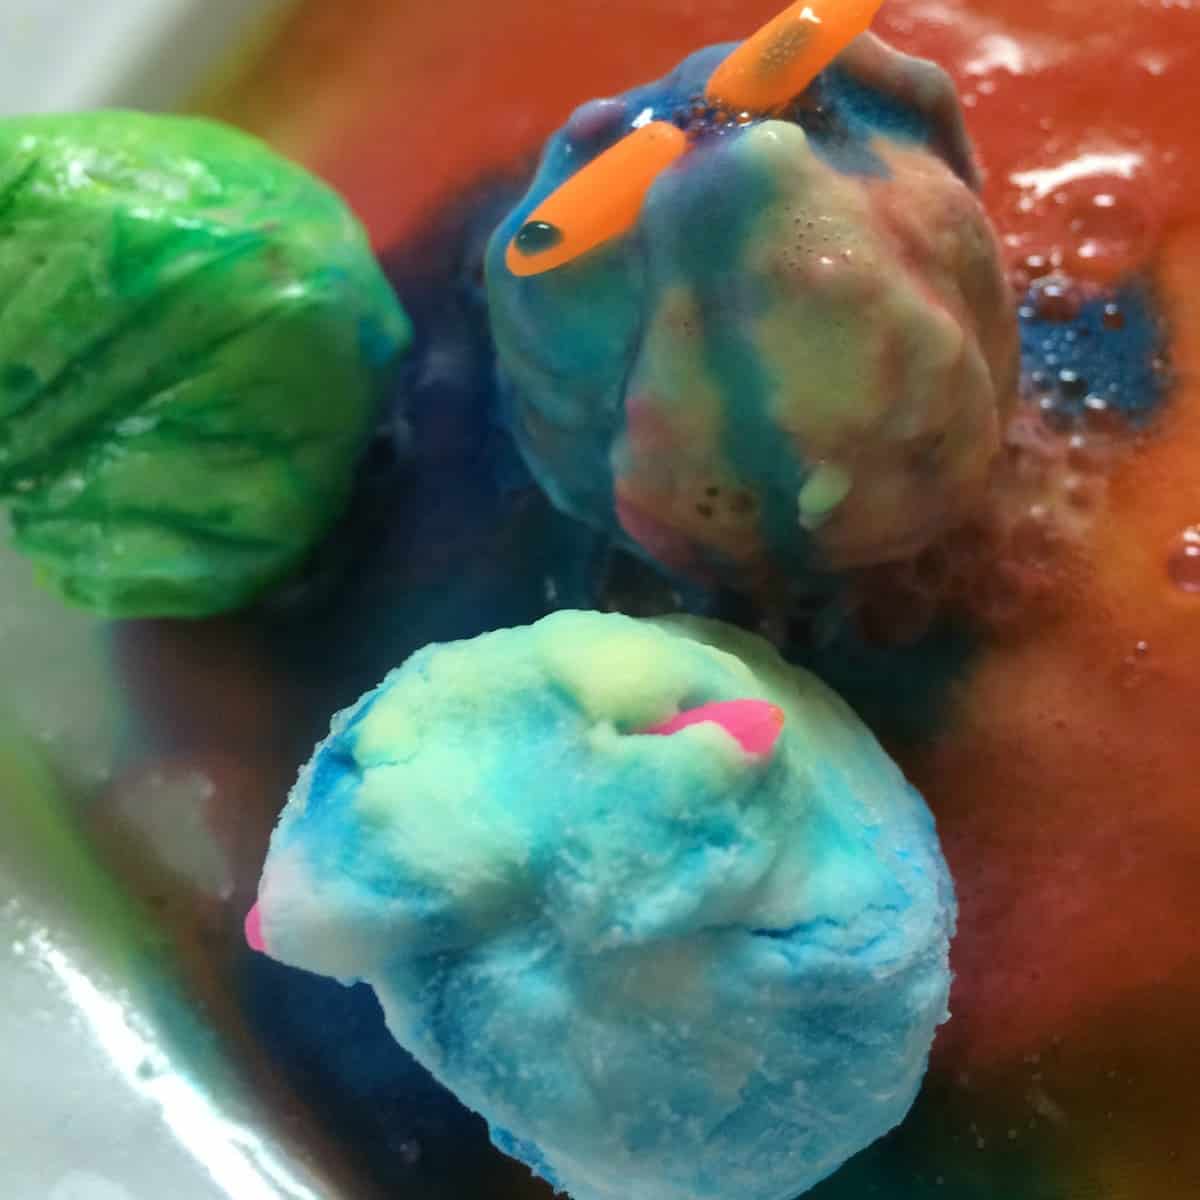 Make some baking soda eggs, hide a surprise inside, and let your kids make them erupt with some vinegar! They will want to make these erupting Easter eggs again and again!